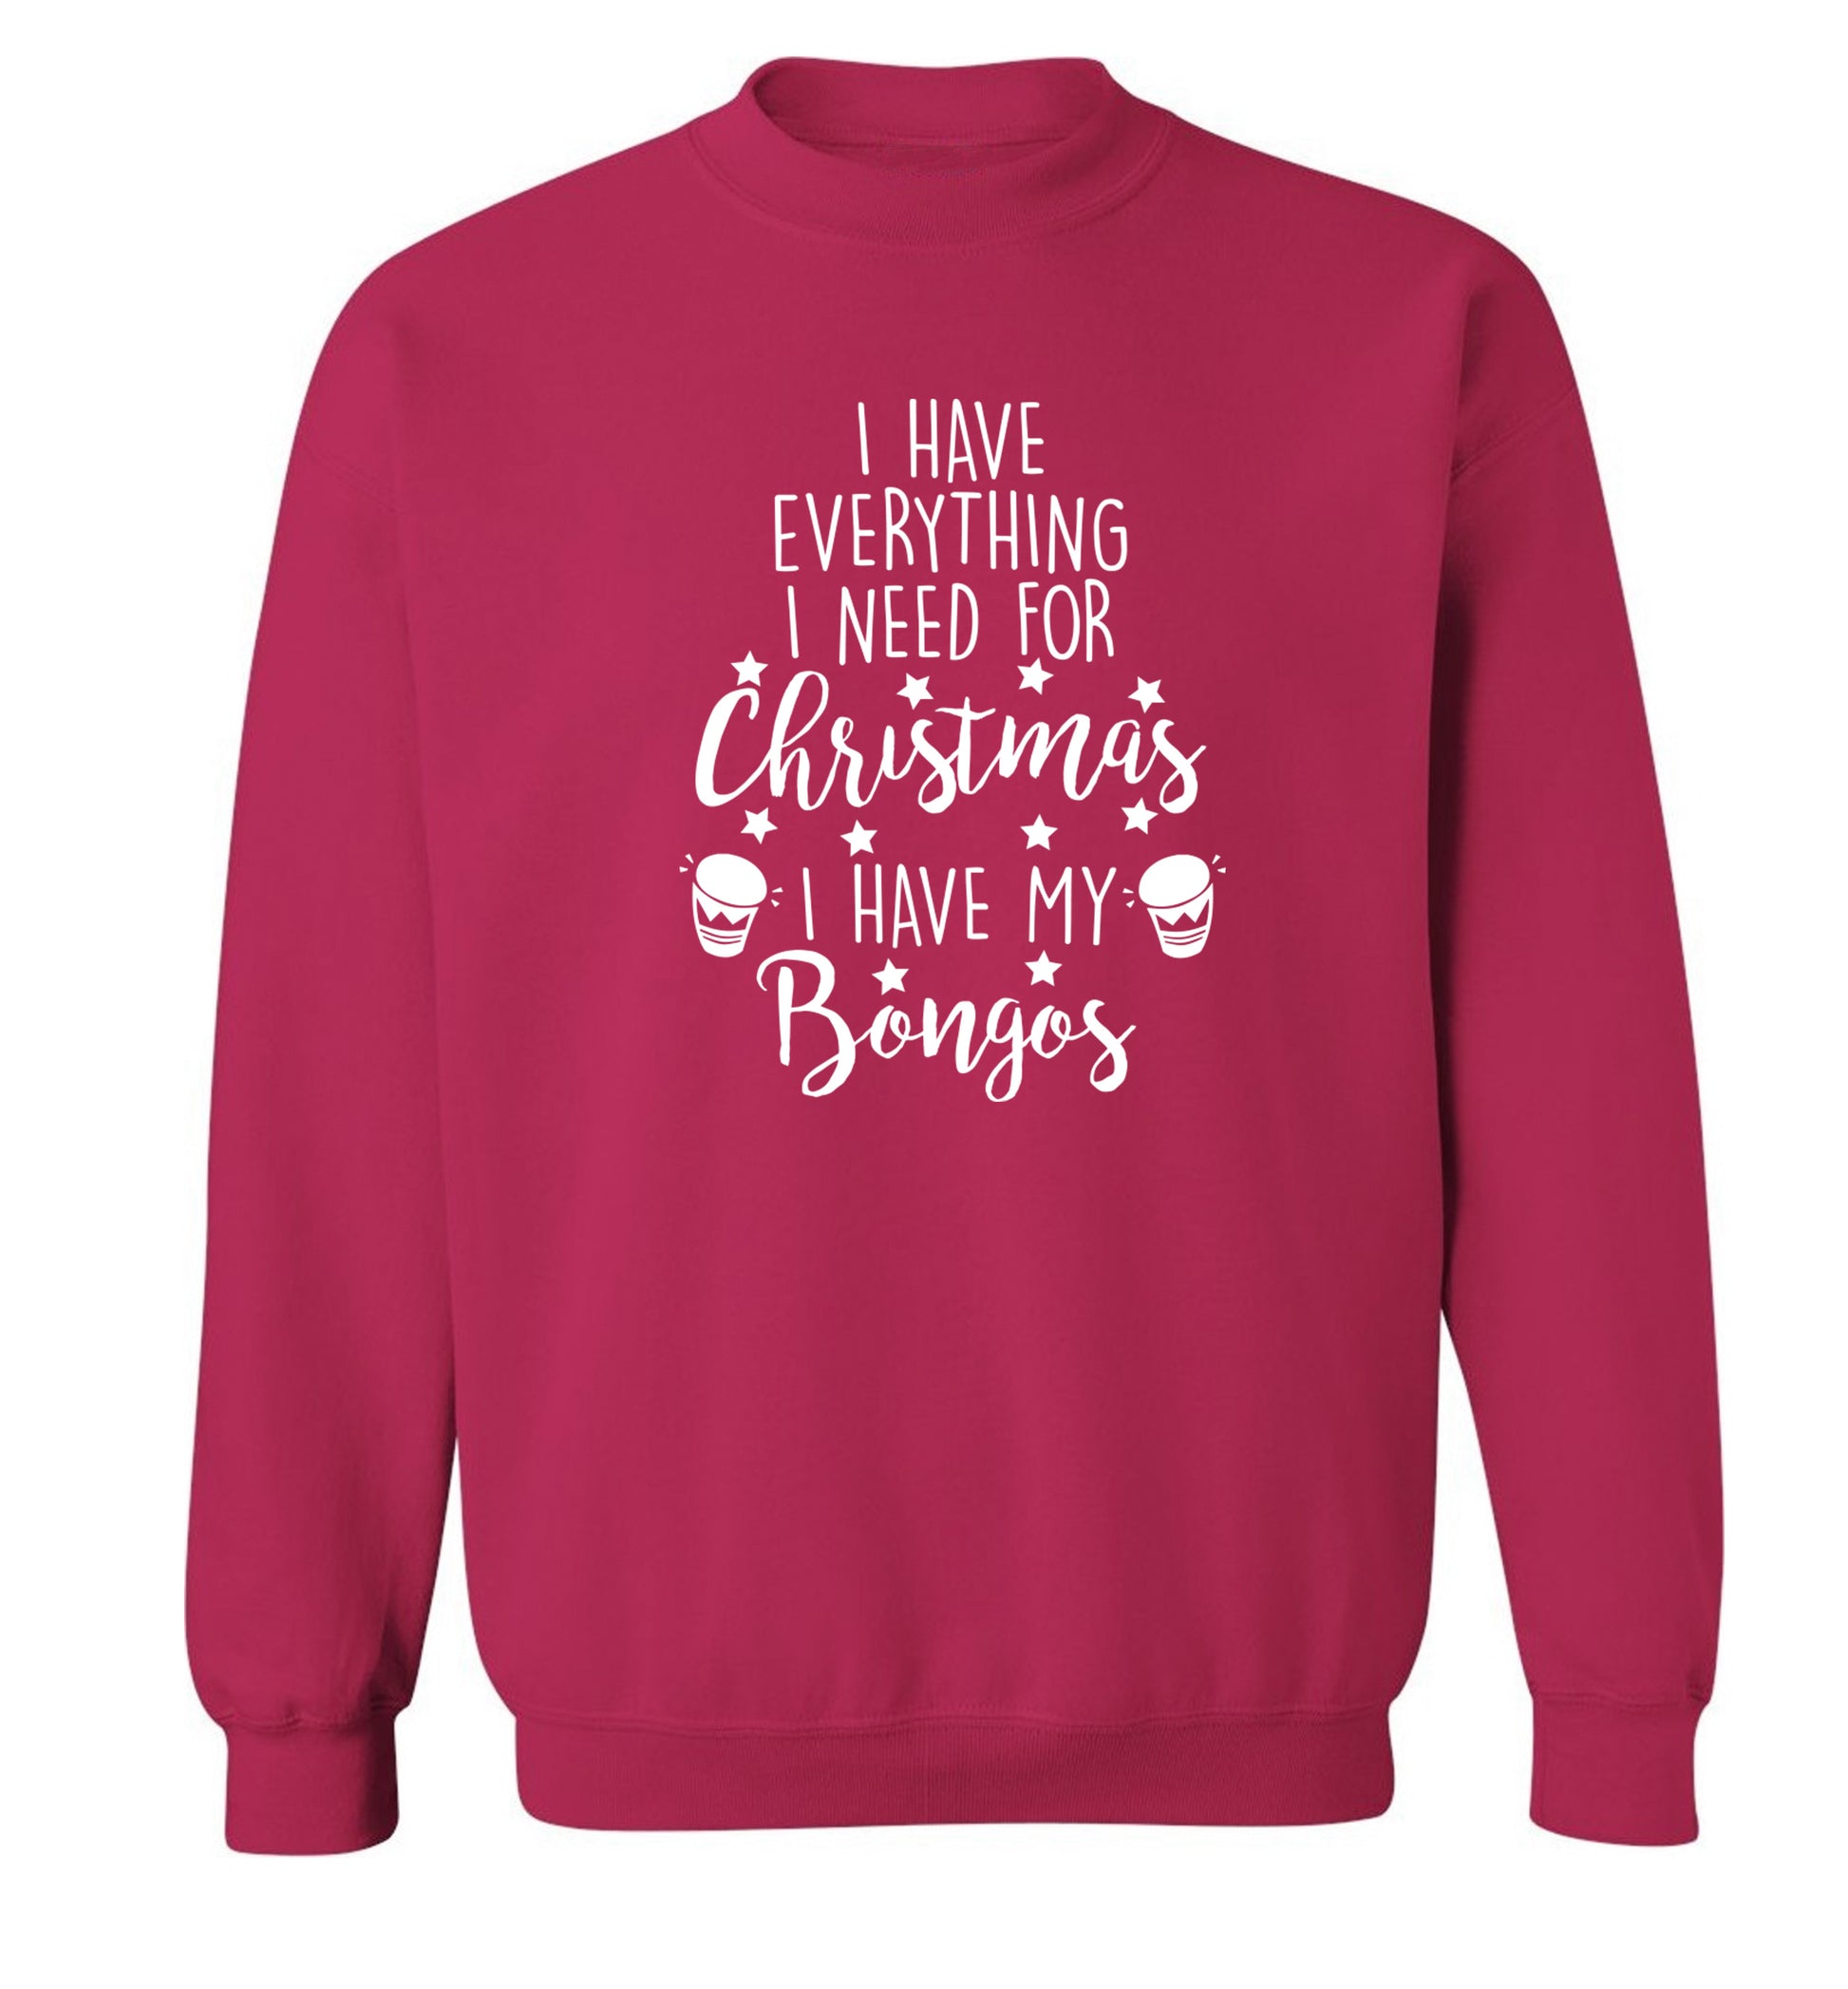 I have everything I need for Christmas I have my bongos! Adult's unisex pink Sweater 2XL